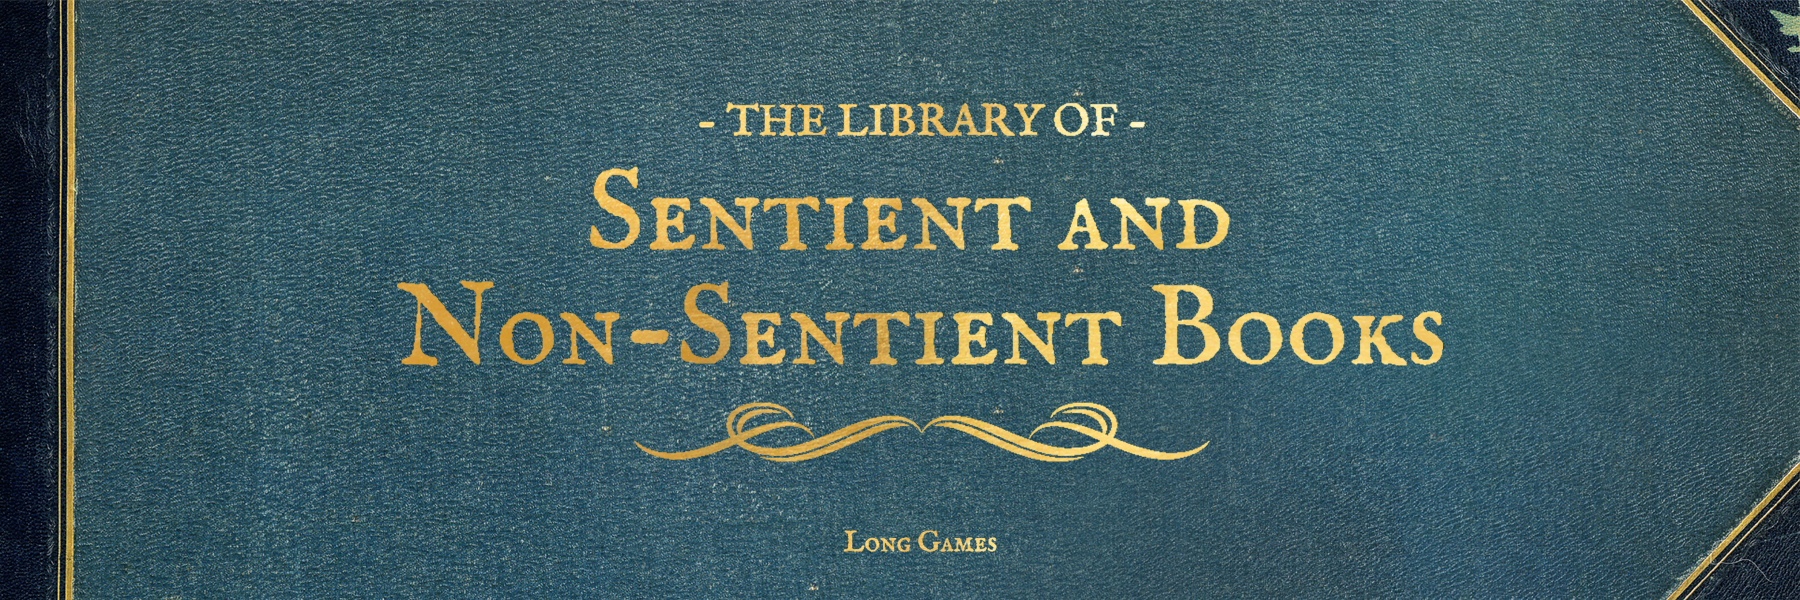 The Library Of Sentient And Non-Sentient Books